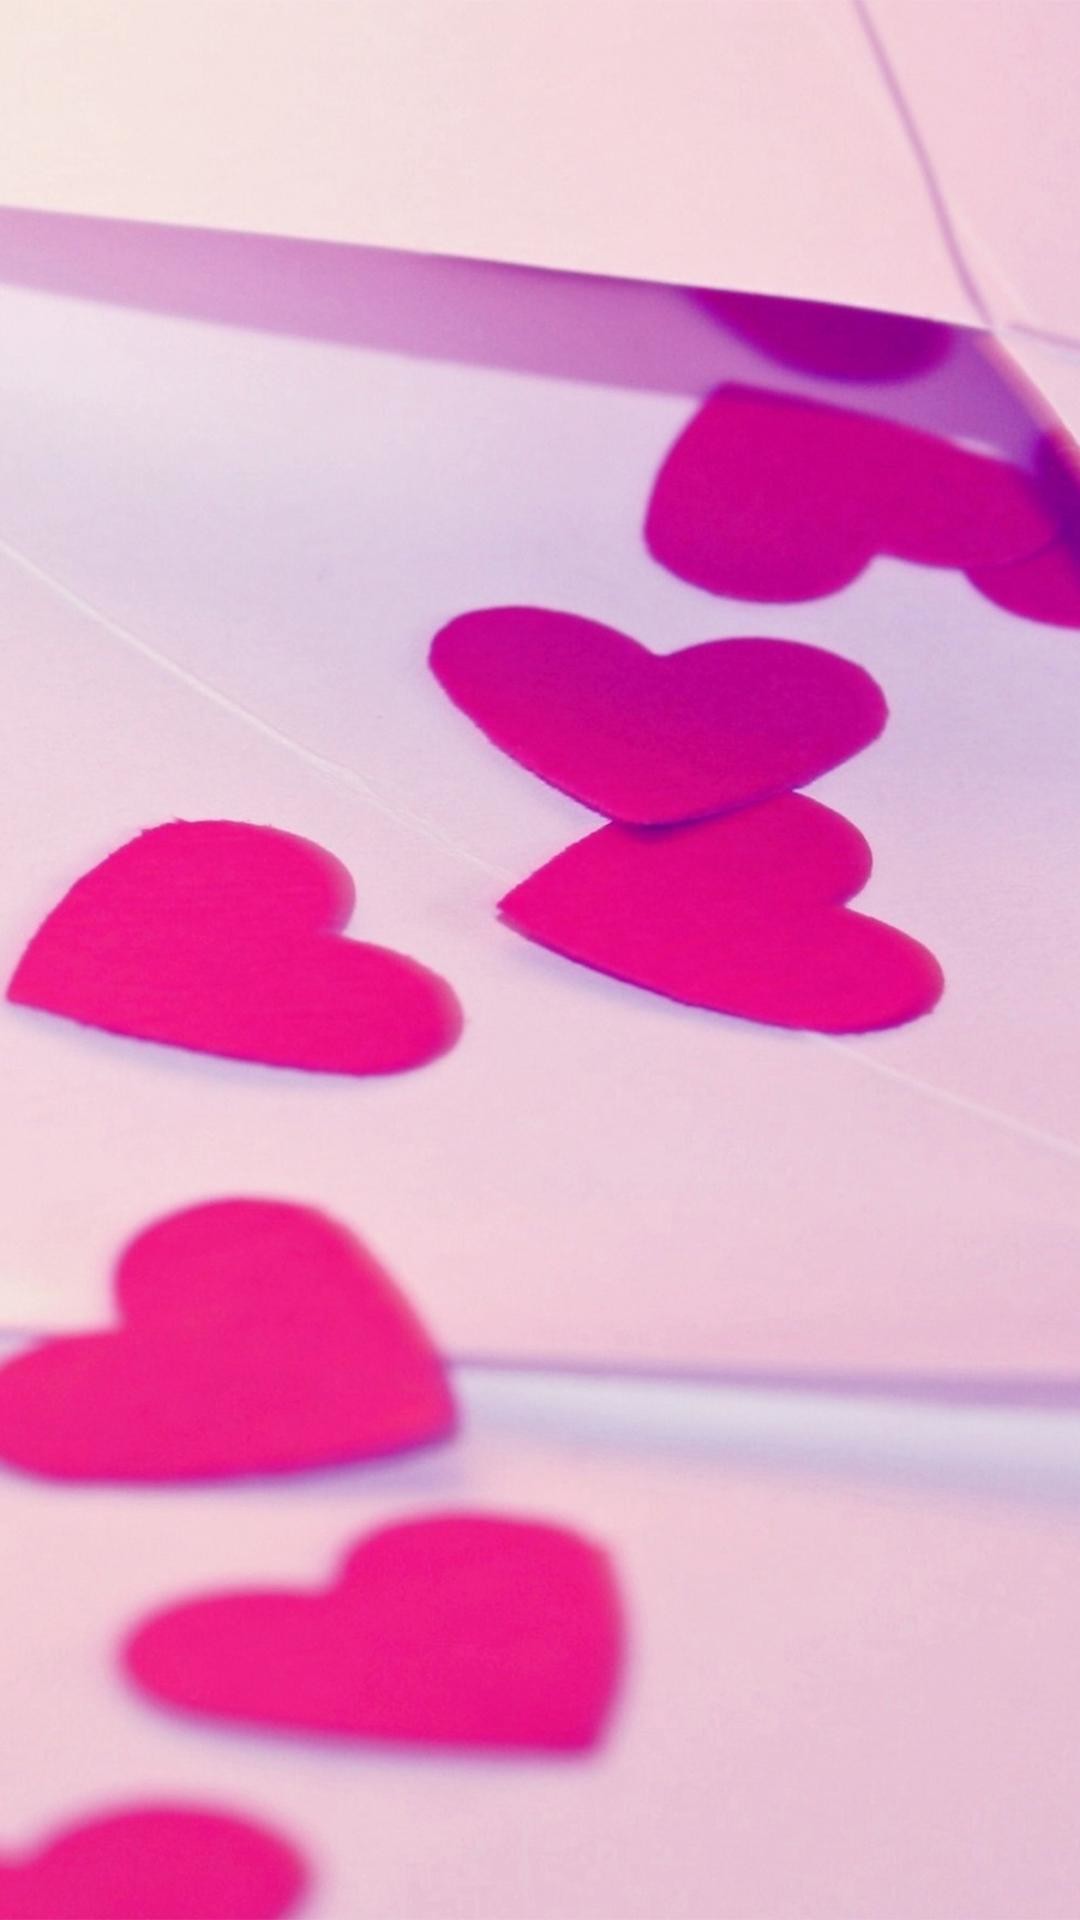 Wallpaper.wiki Cool Pink Love Iphone Background PIC